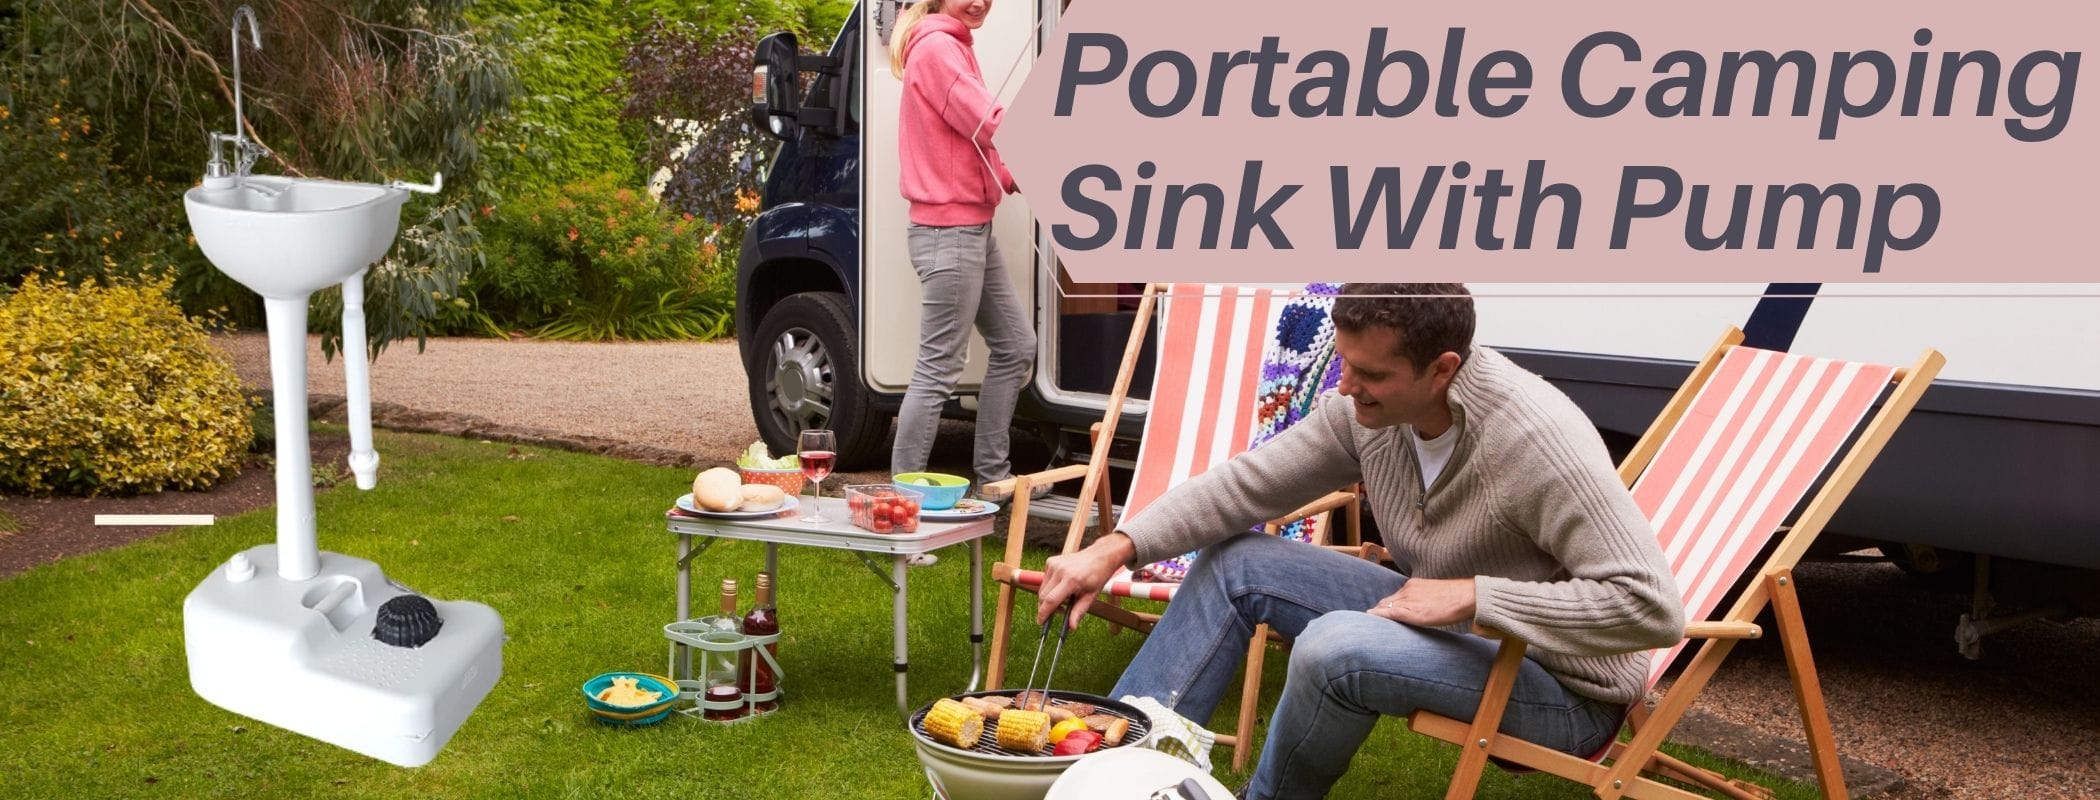 Portable Camping Sink With Pump 